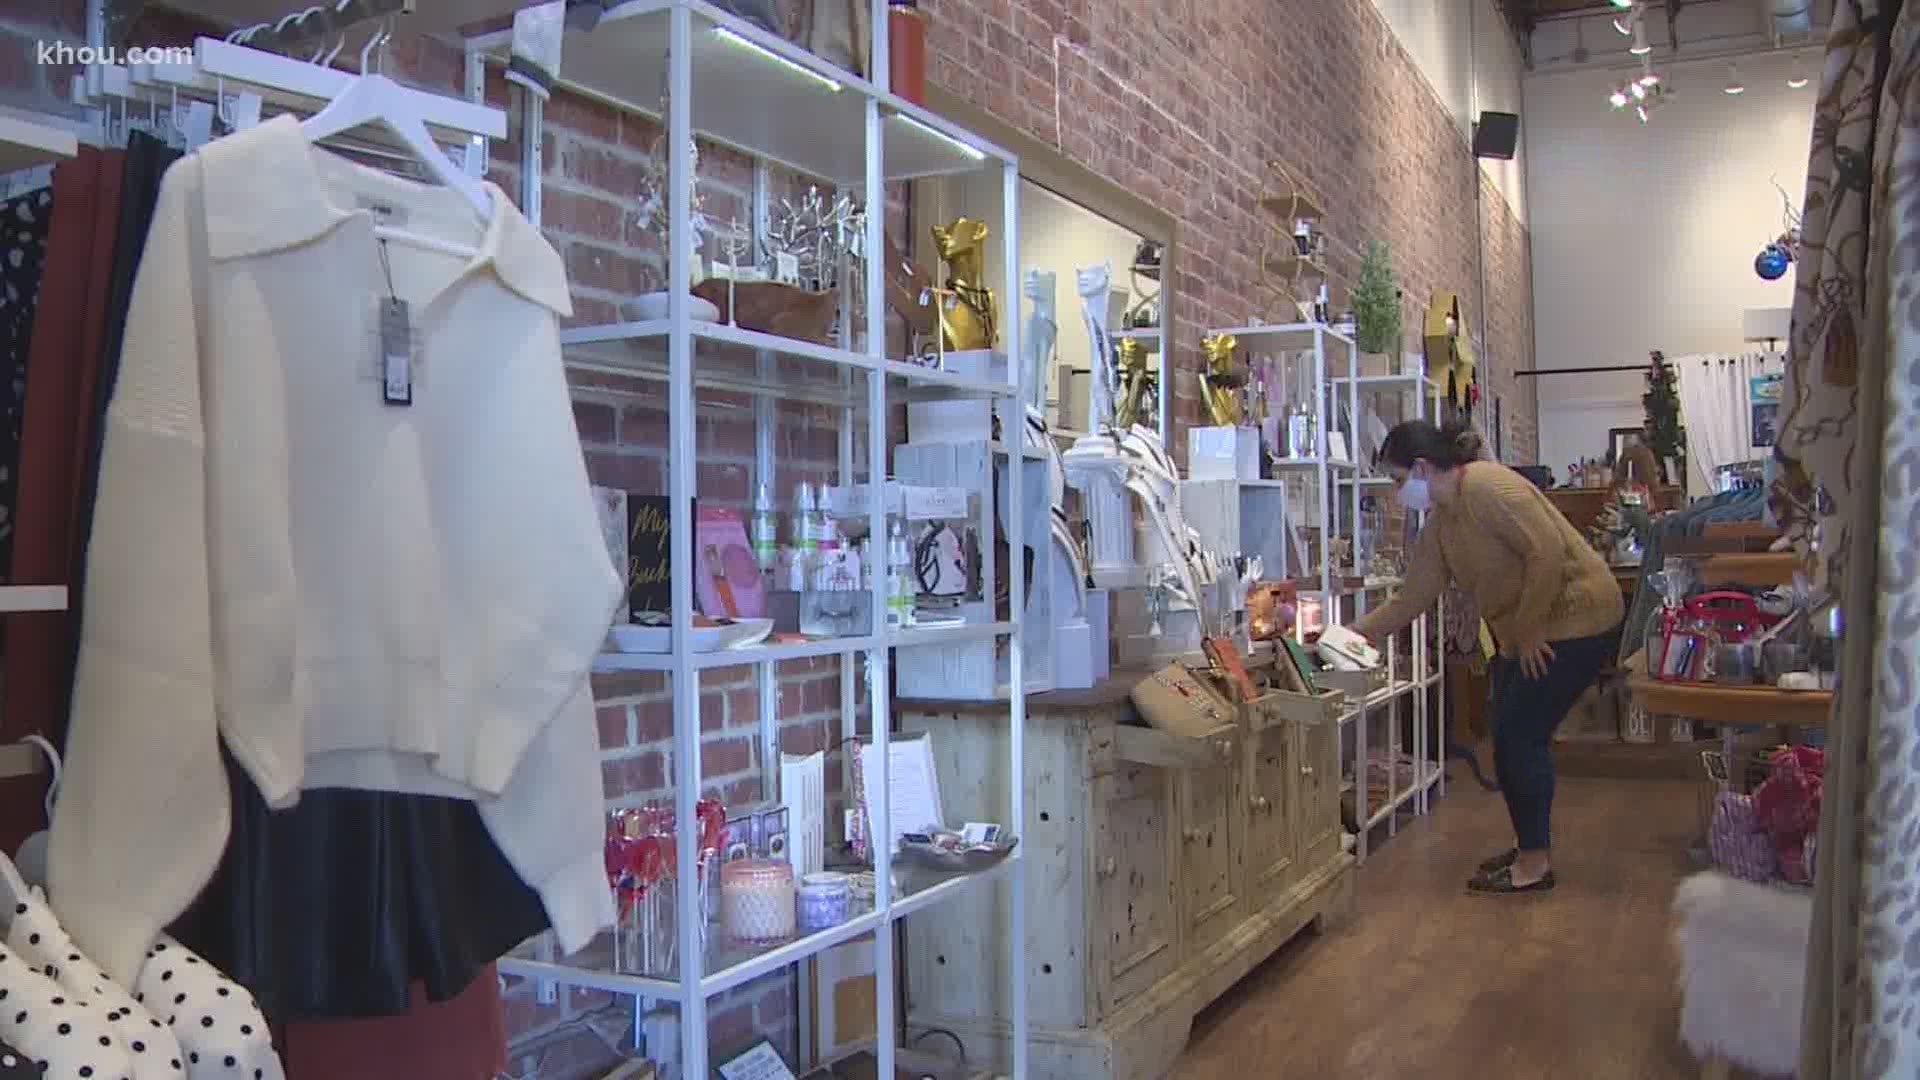 Businesses are preparing for Black Friday and Small Business Saturday. Local mom-and-pop shops are getting ready for what they hope will be a busy shopping season.